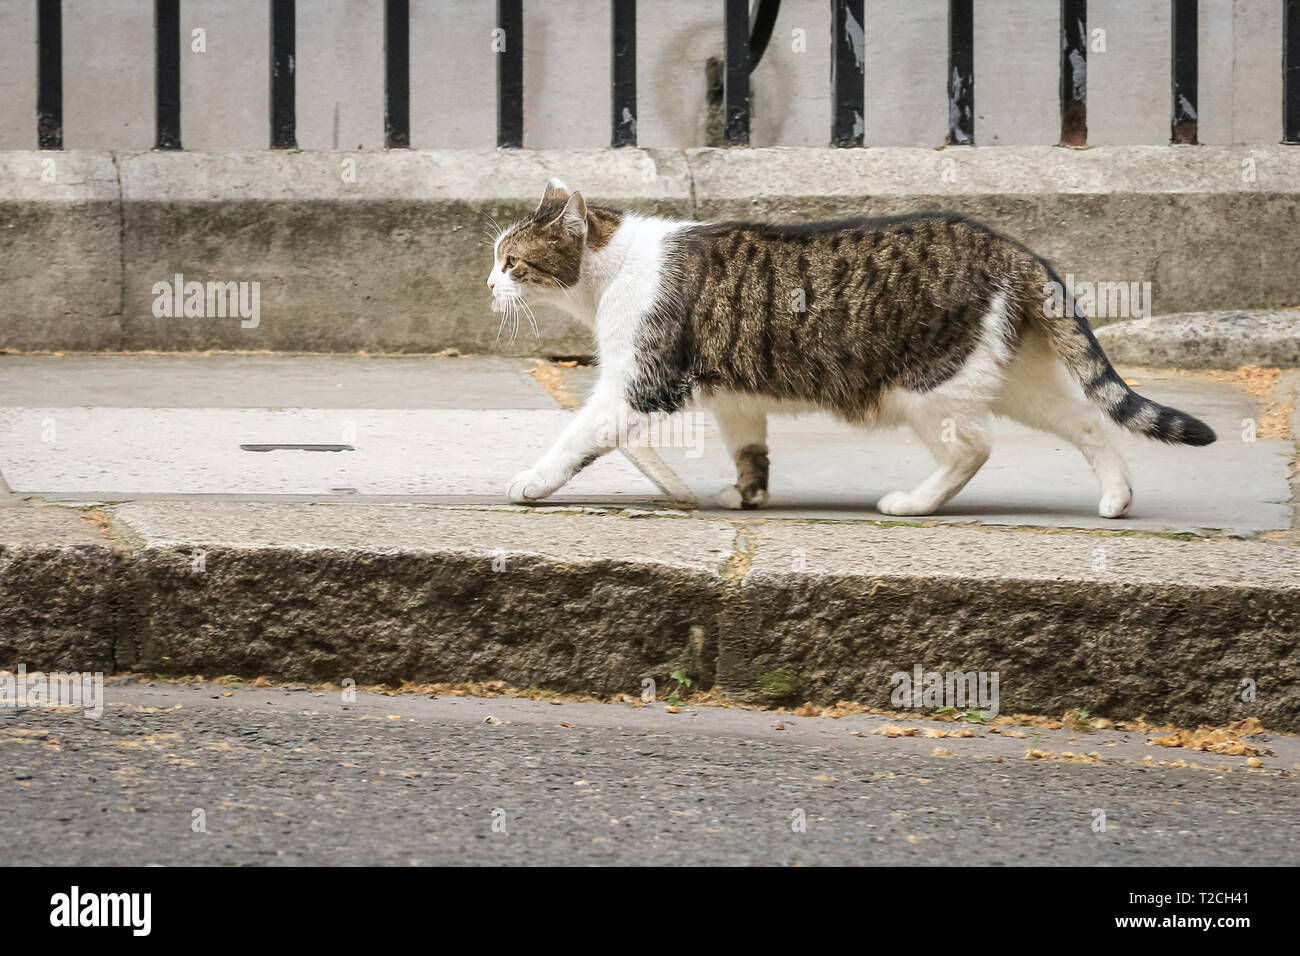 Westminster, London, UK, 1st April 2019. Larry, the resident No 10 cat, does his inspection round in Downing Street before being let back inside for further work in his position as Chief Mouser. Earlier today, several April Fool's jokes had been circulated by media, including that Larry had gone on strike, and that a cat flap had been installed in the door at No 10. Credit: Imageplotter/Alamy Live News Stock Photo